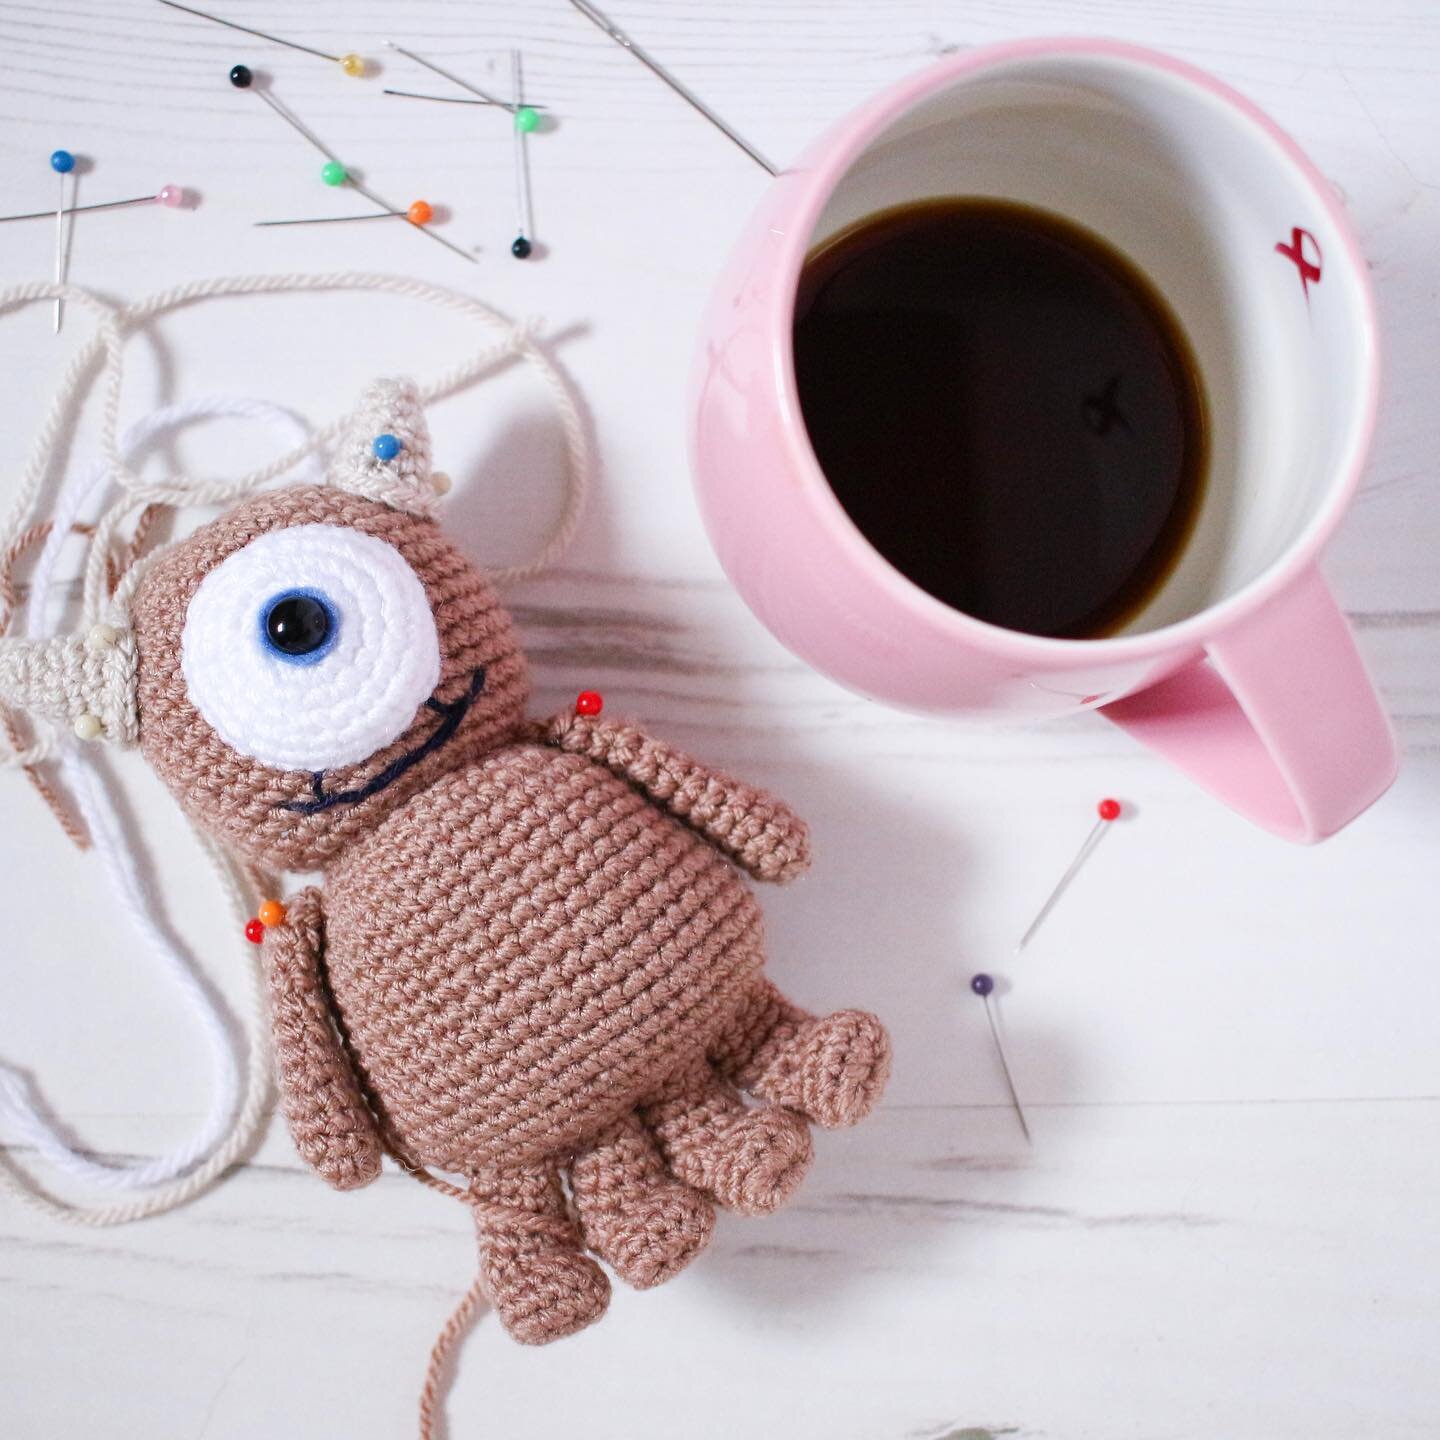 Good morning ☕️ Any Monsters Inc fans out there?

I&rsquo;m almost done with Little Mikey! He&rsquo;s got a brand new eye. I wasn&rsquo;t very happy with the first one I made, and it wasn&rsquo;t sewn on very well either. It looks so much better now!